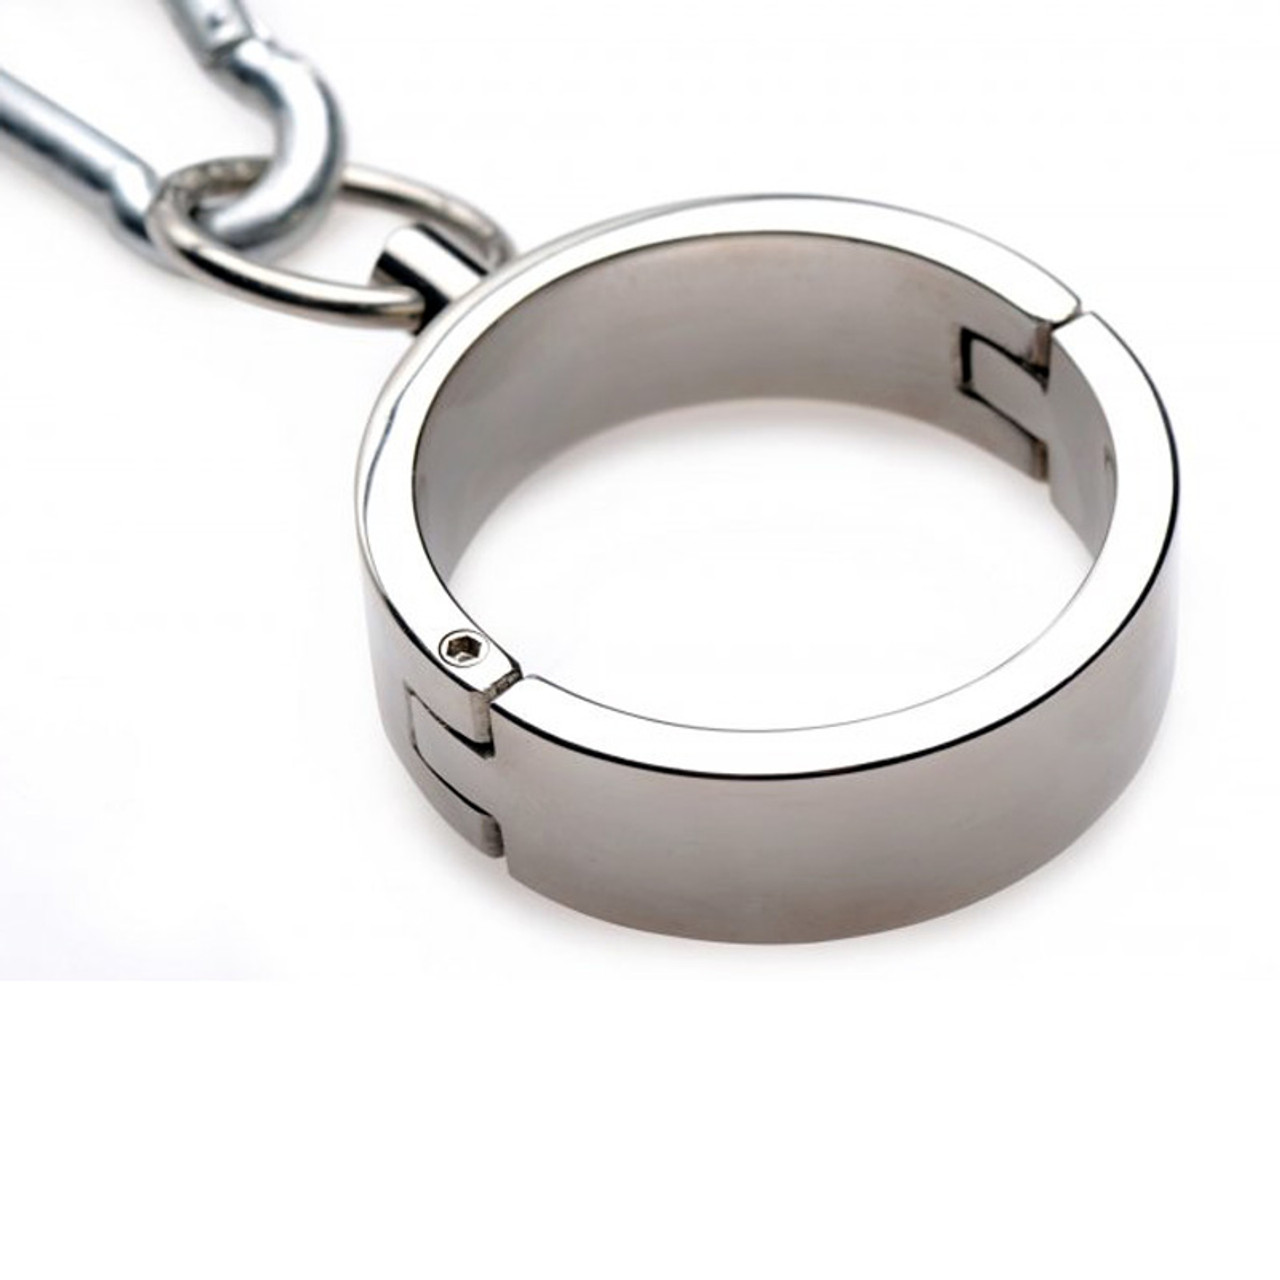 Buy The Stainless Steel Yoke With Locking Collar And Cuffs